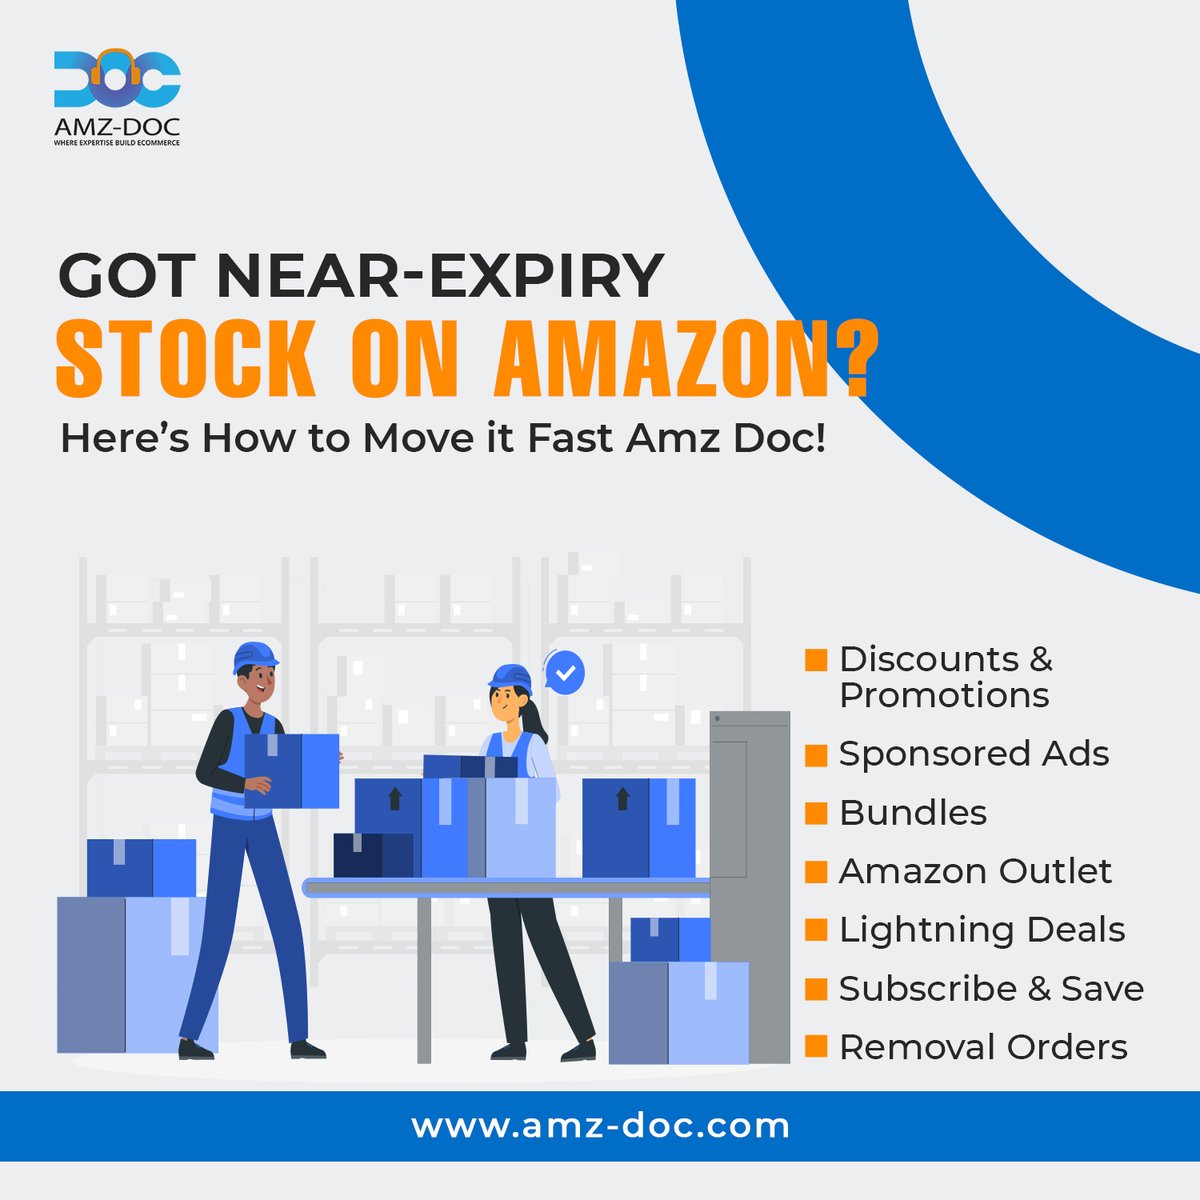 Got near-expiry stock on Amazon? Here’s how to move it fast Amz Doc! 🏃‍♂️💨

#AmzDoc #AmazonSeller #InventoryManagement #Ecommerce #SellFast #BusinessTips #Discounts #Promotions #SponsoredAds #Bundles #OutletDeals